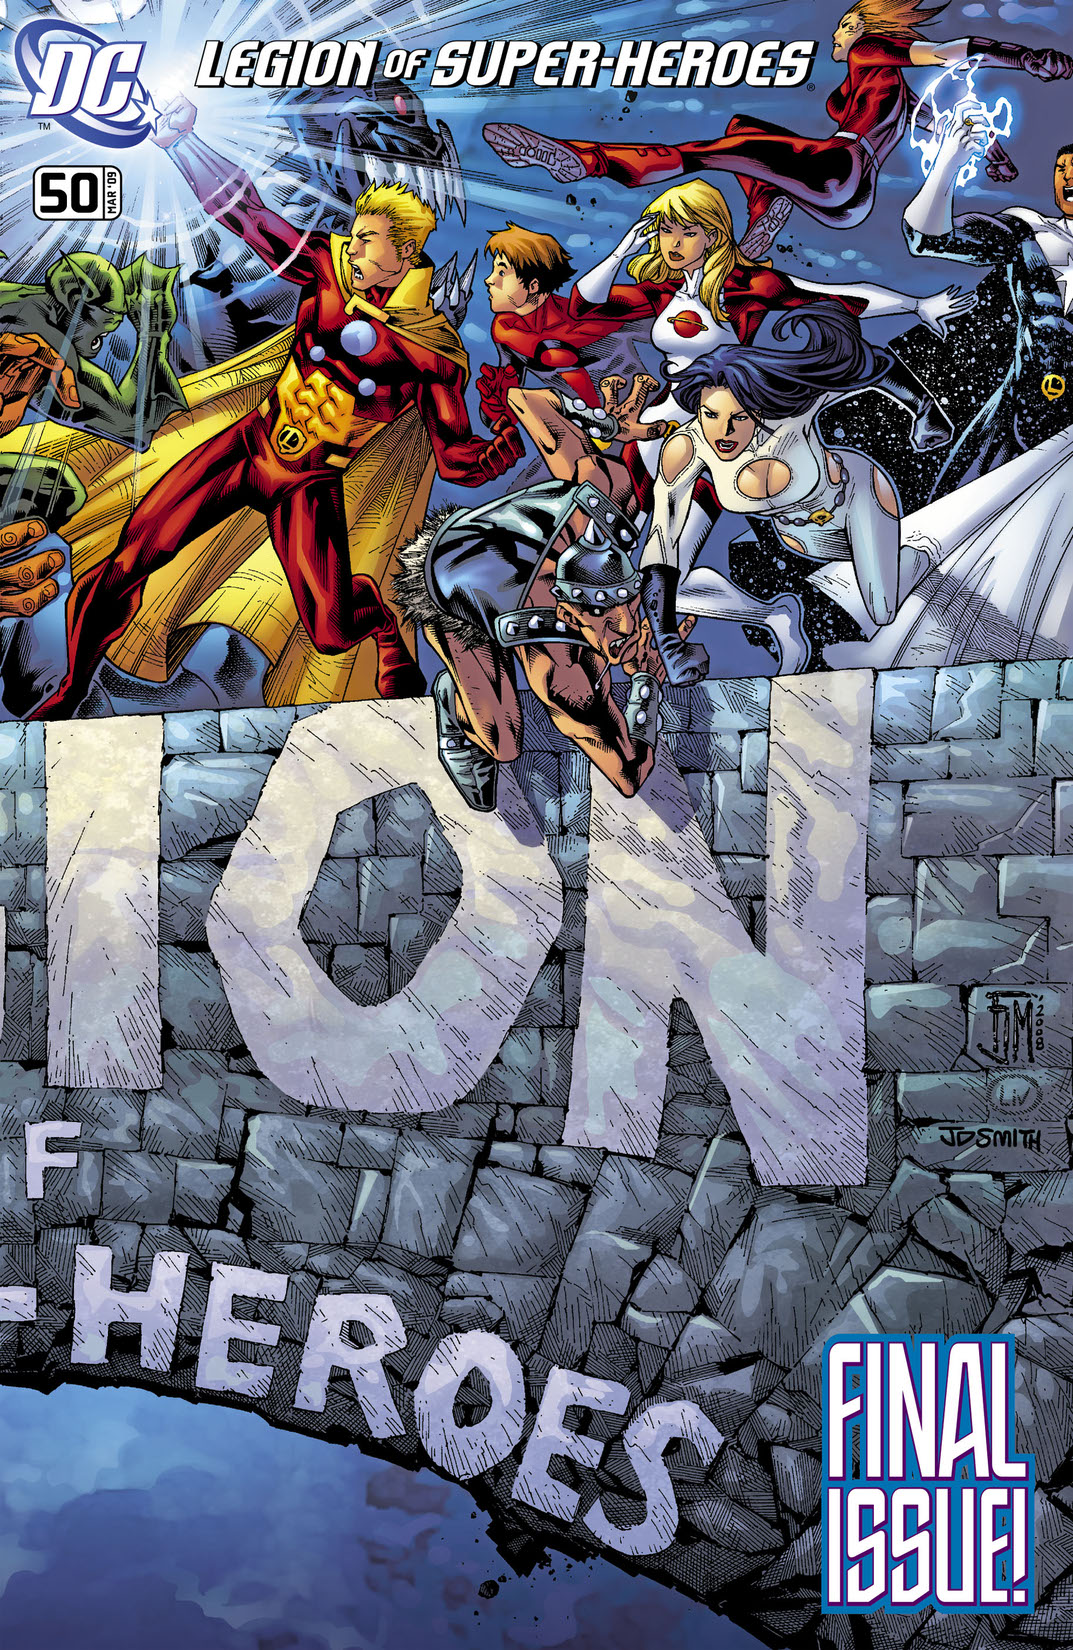 Legion of Super-Heroes (2007-) #50 preview images